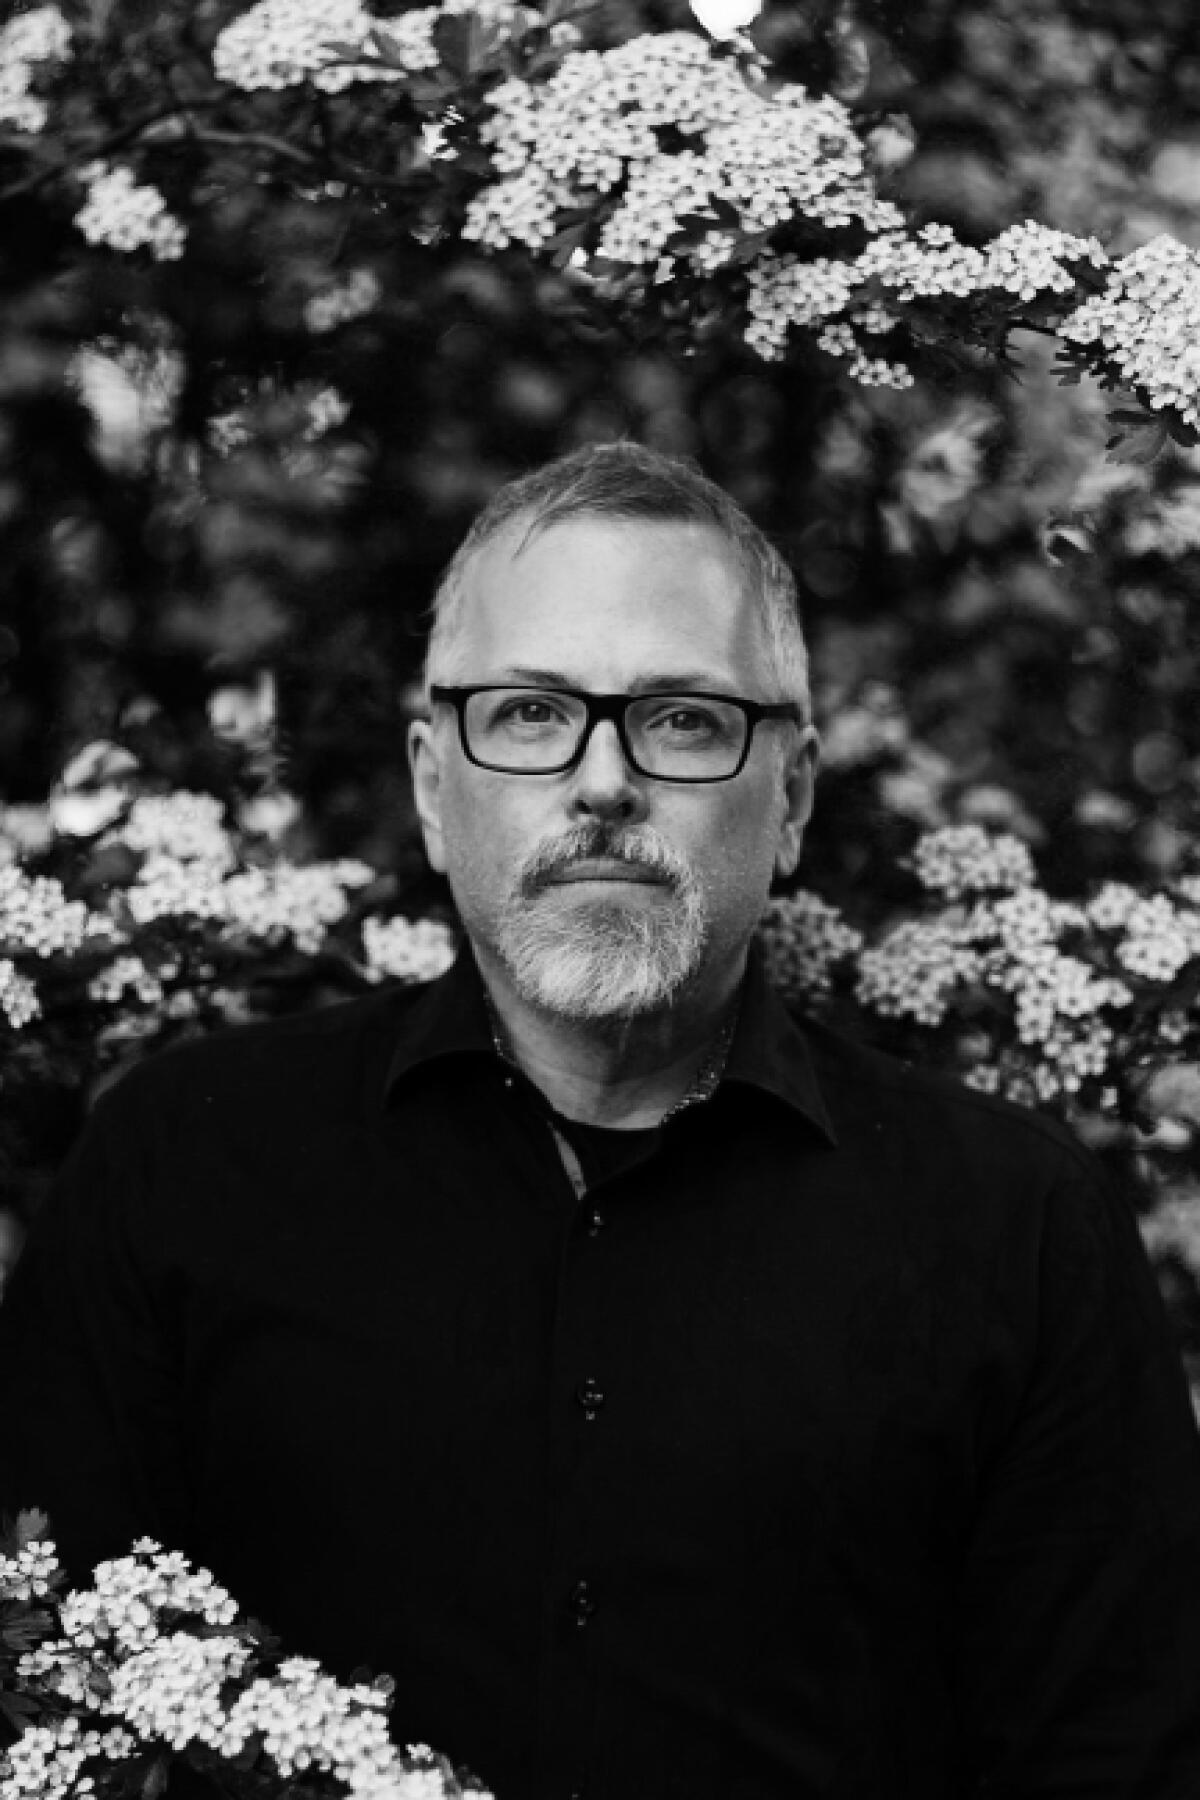 Jeff Vandermeer, with salt and pepper hair and trim beard in glasses and a dark shirt with flower blossoms behind him.